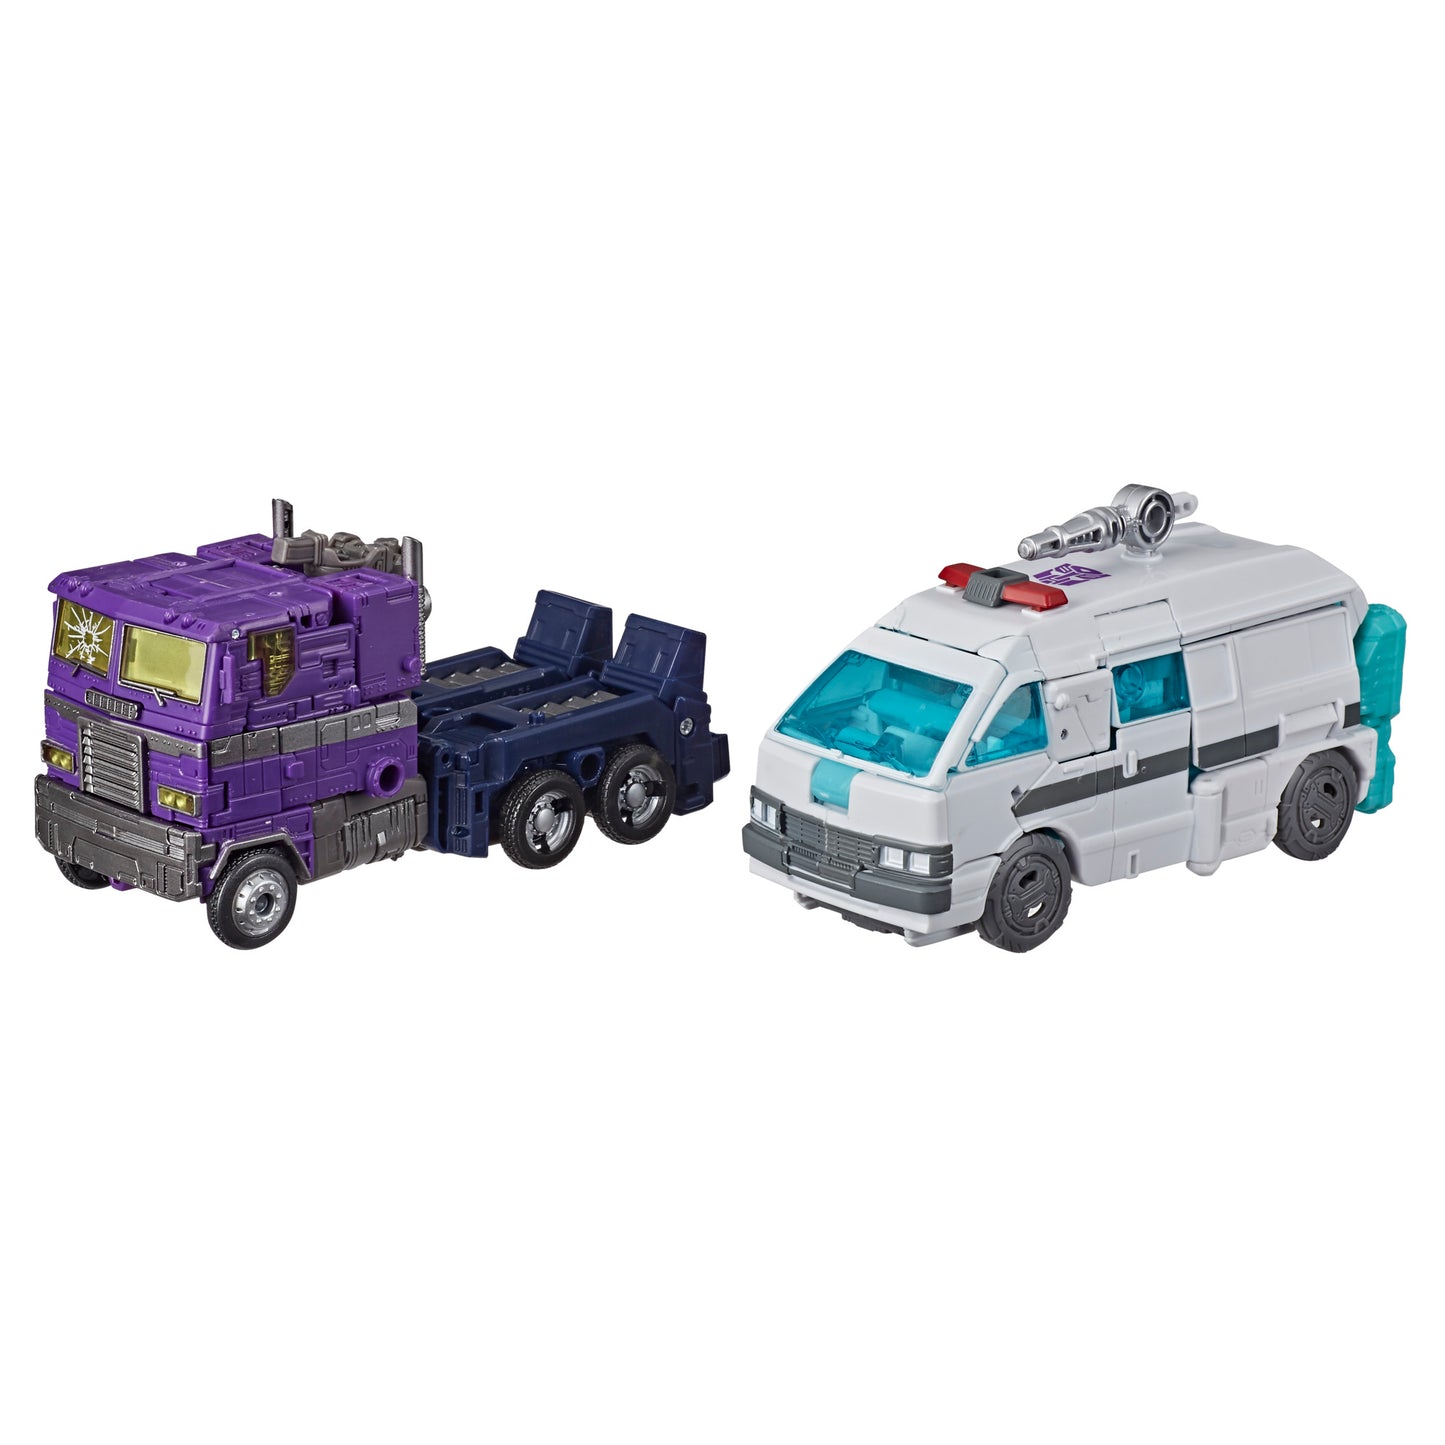 Transformers Generations Selects WFC-GS17 Shattered Glass Ratchet and Optimus Prime, War for Cybertron Collector Figures